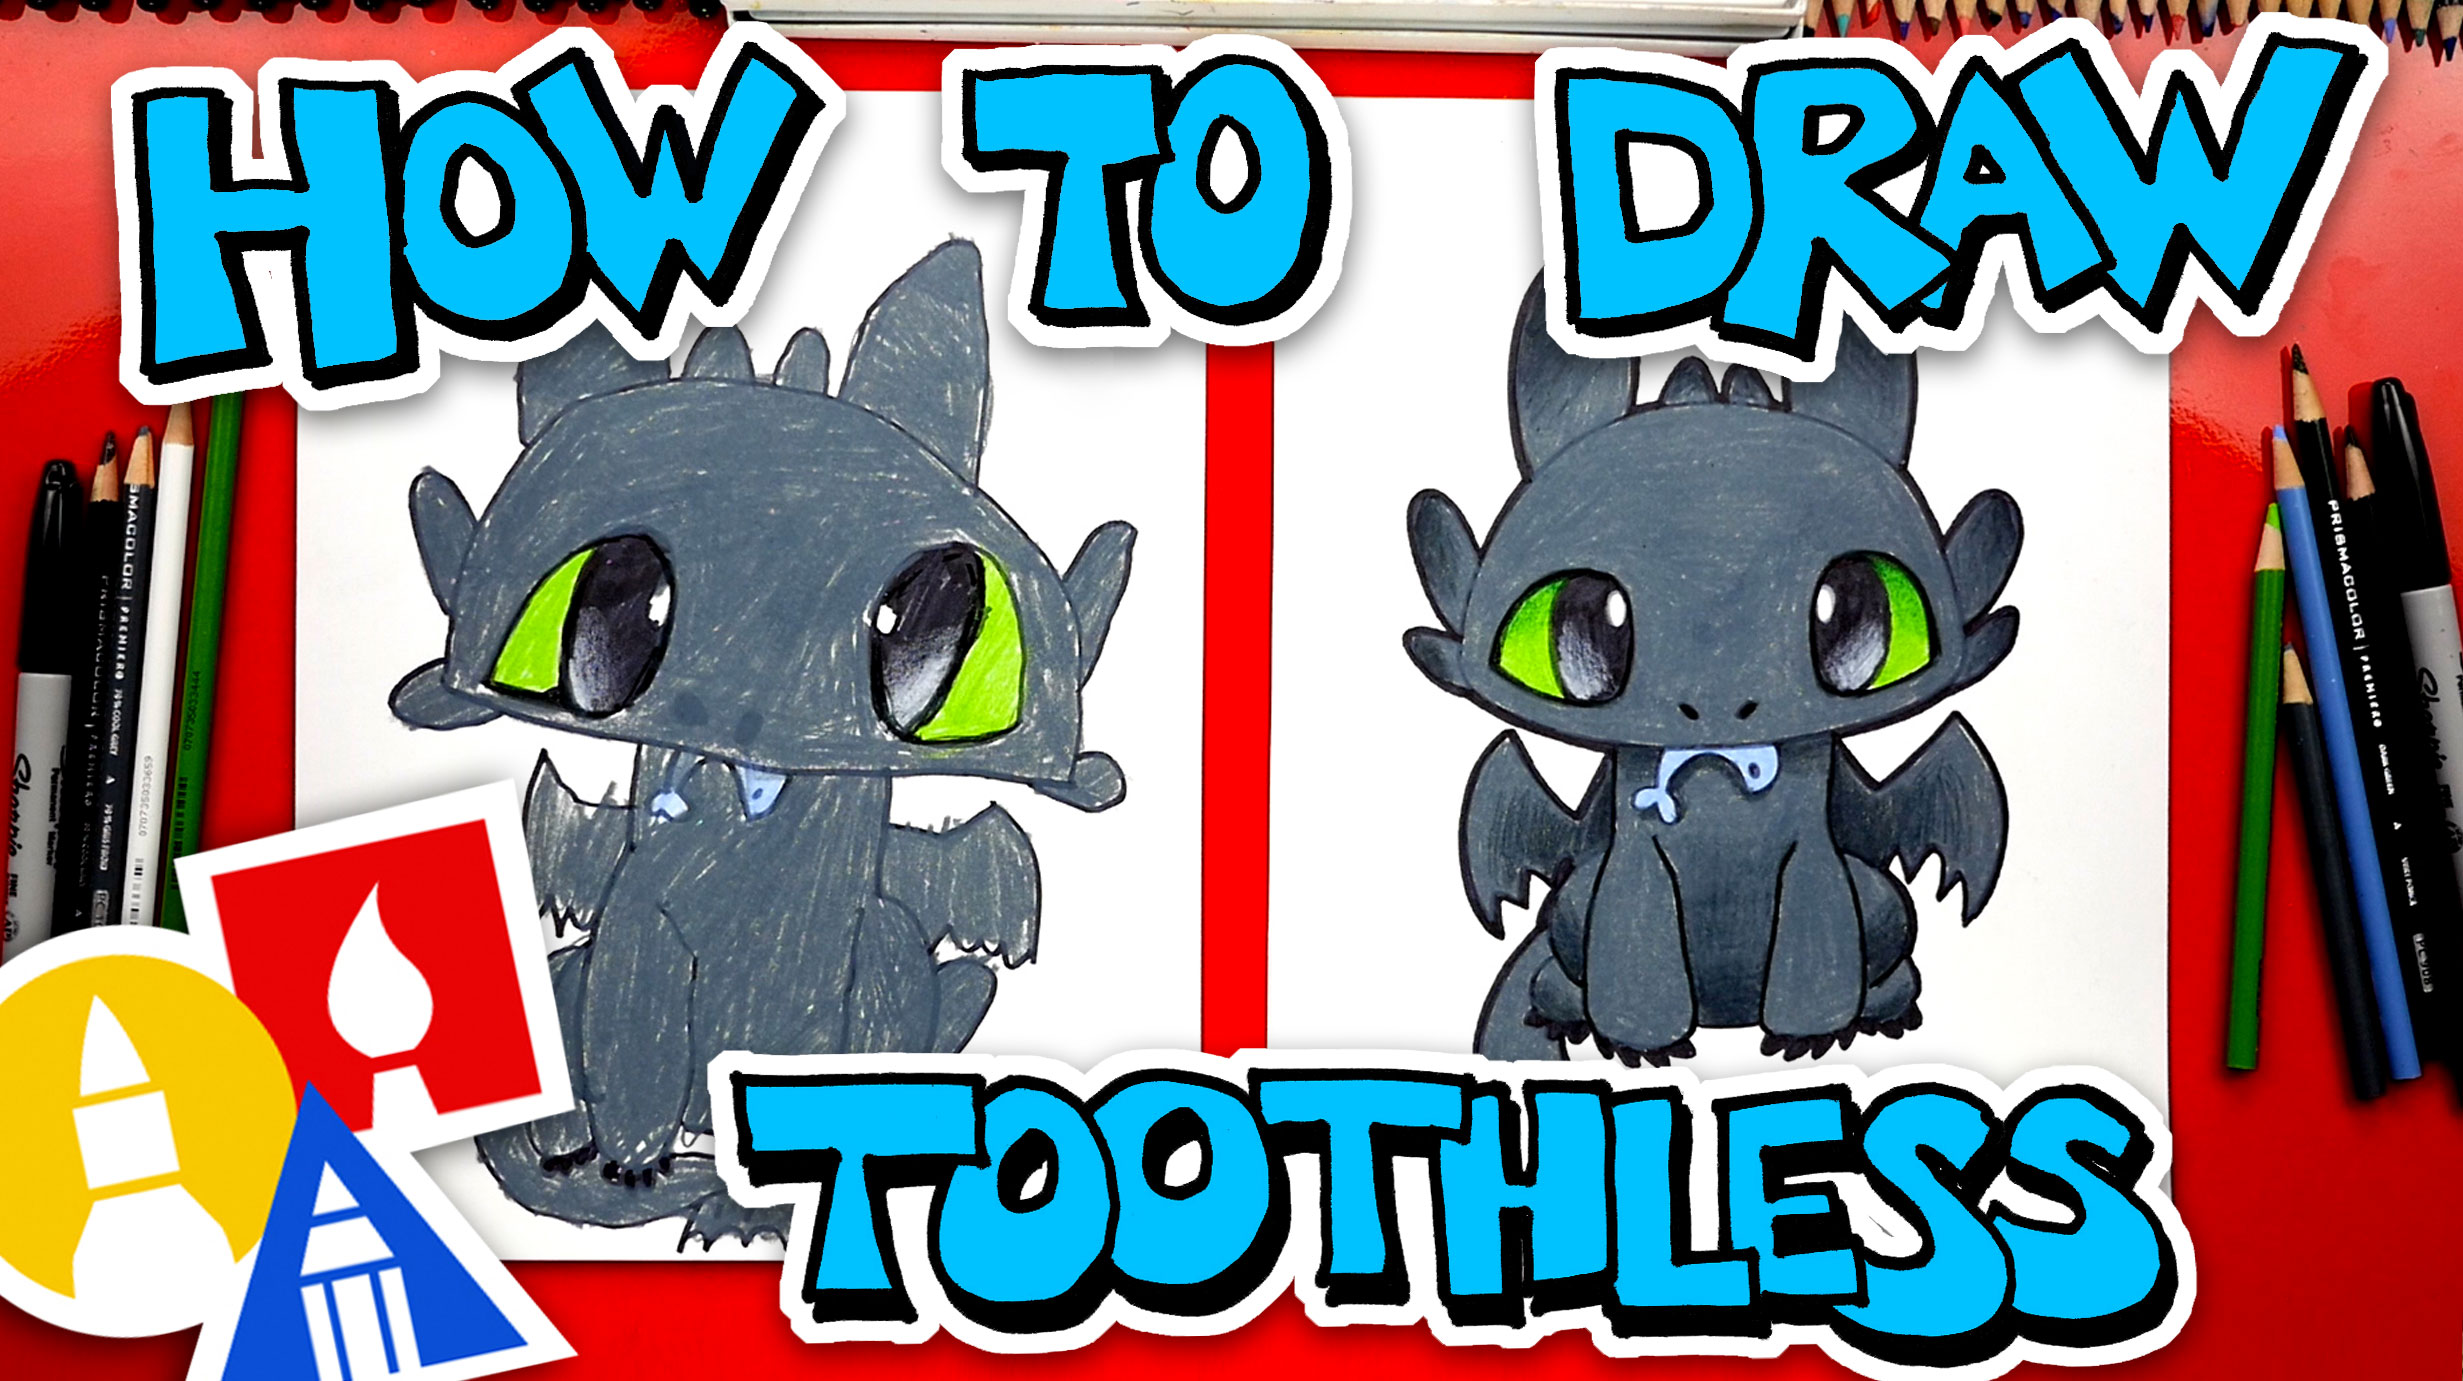 How To Draw Toothless From How To Train Your Dragon Night Fury Art For Kids Hub